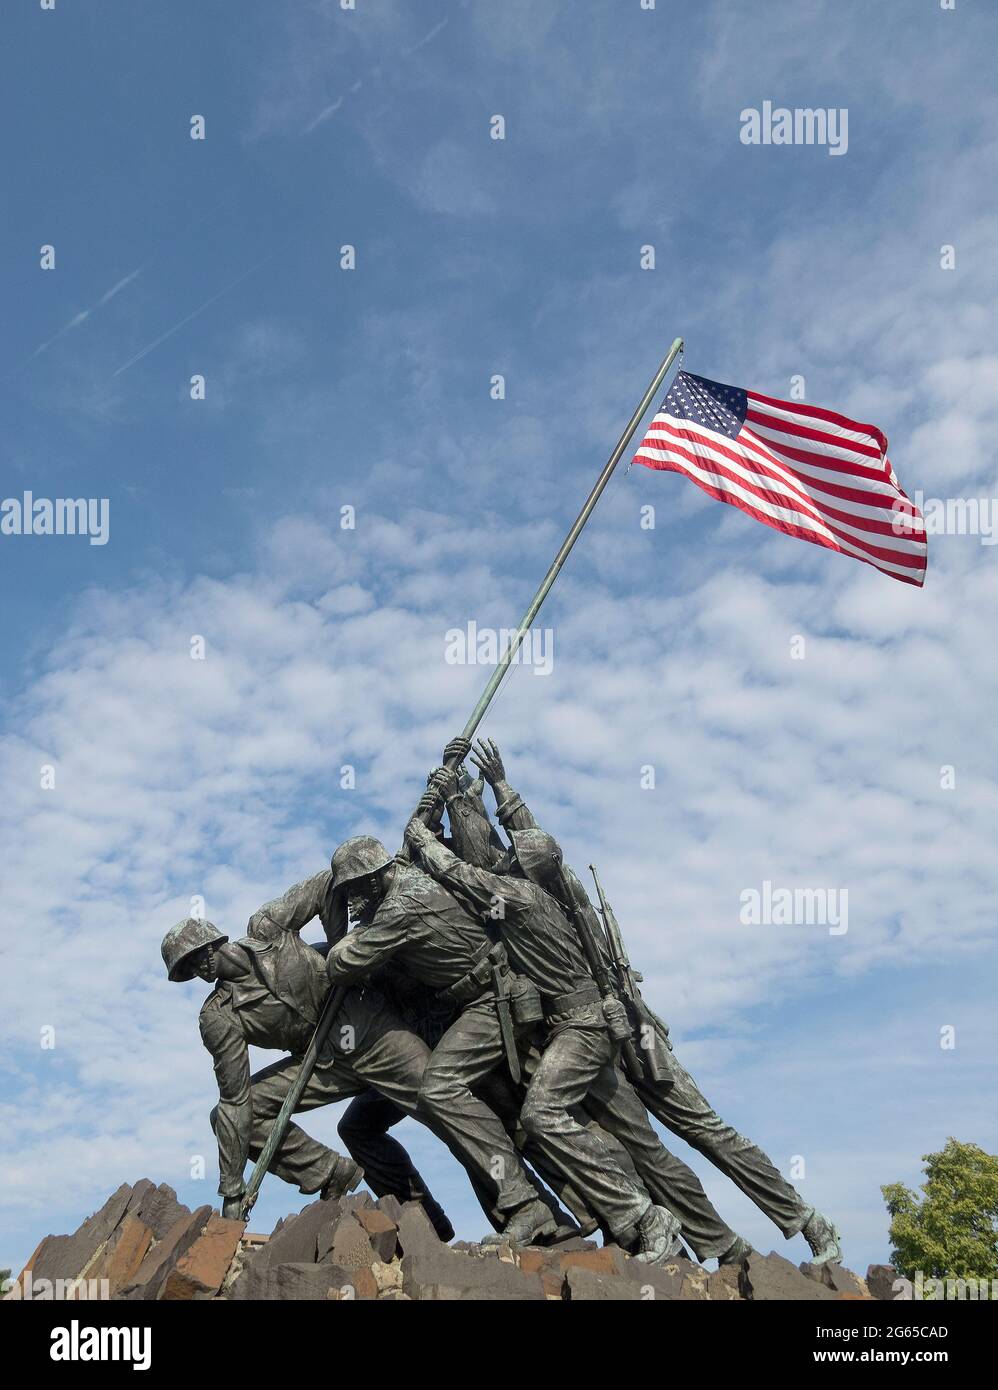 The American flag flutters above the Iwo Jima Memorial. Stock Photo